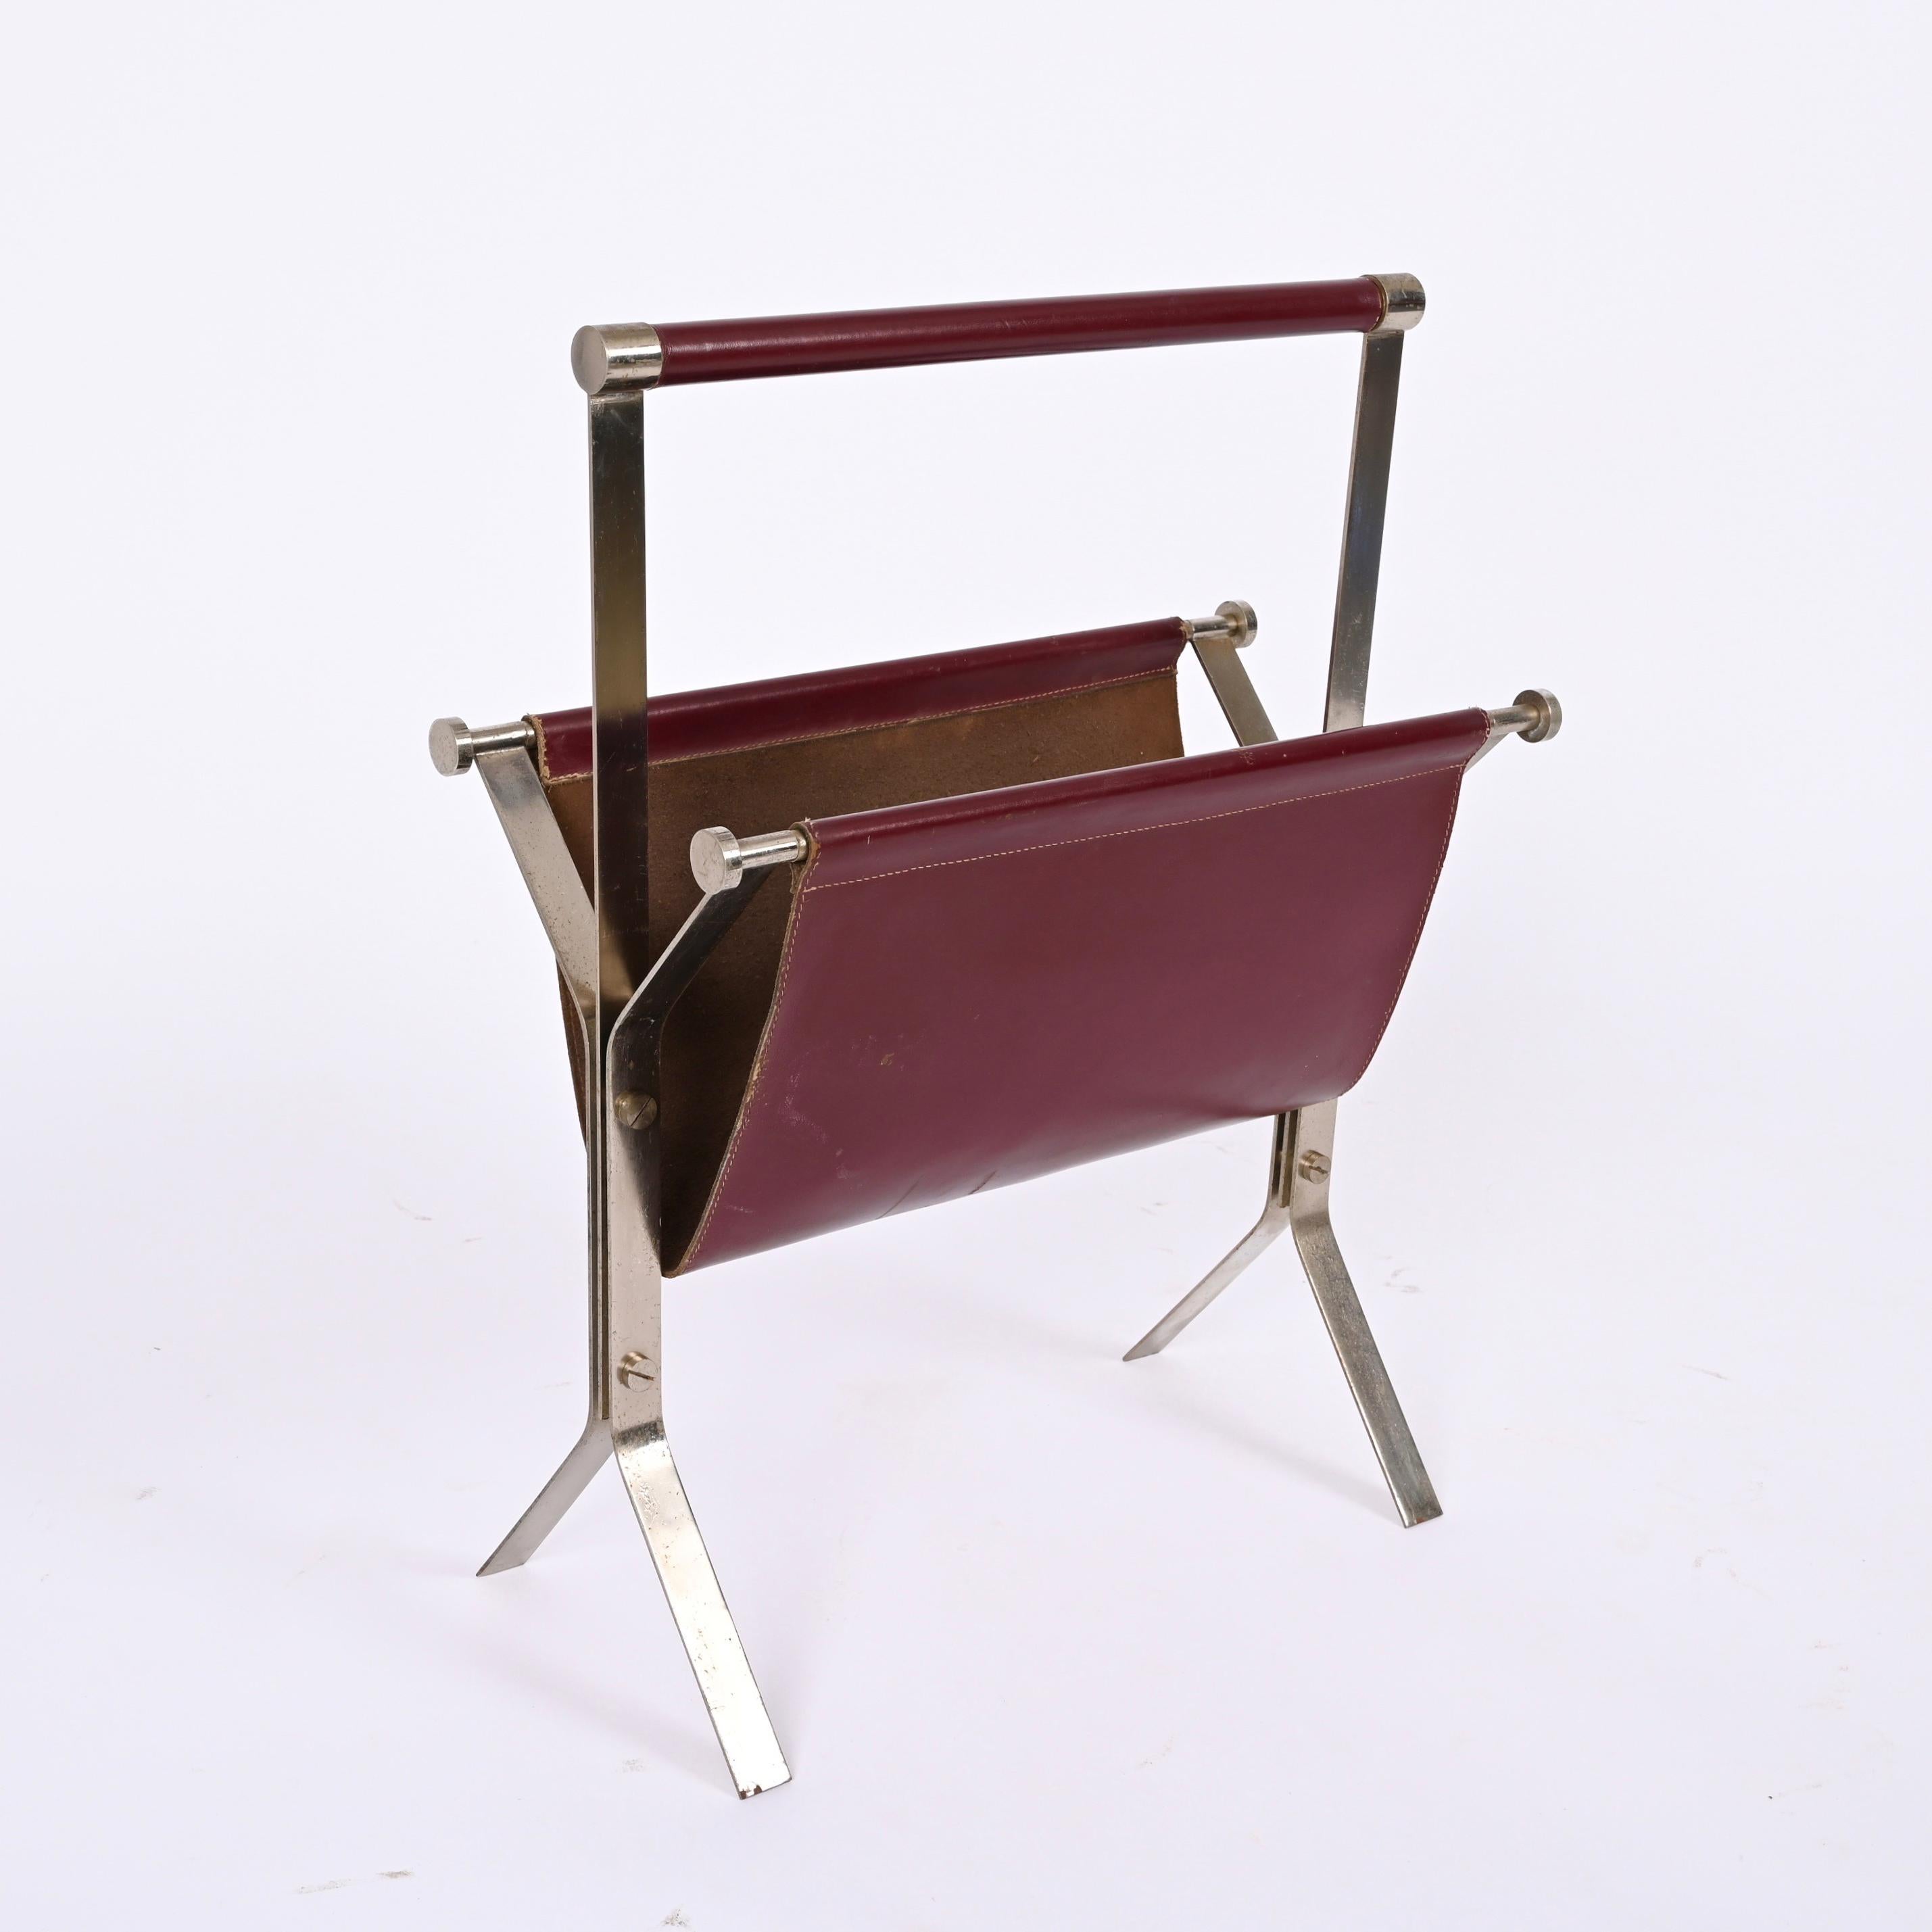 Alessandro Albrizzi Midcentury Chromed Steel and Red Leather Magazine Rack 1970s In Good Condition For Sale In Roma, IT